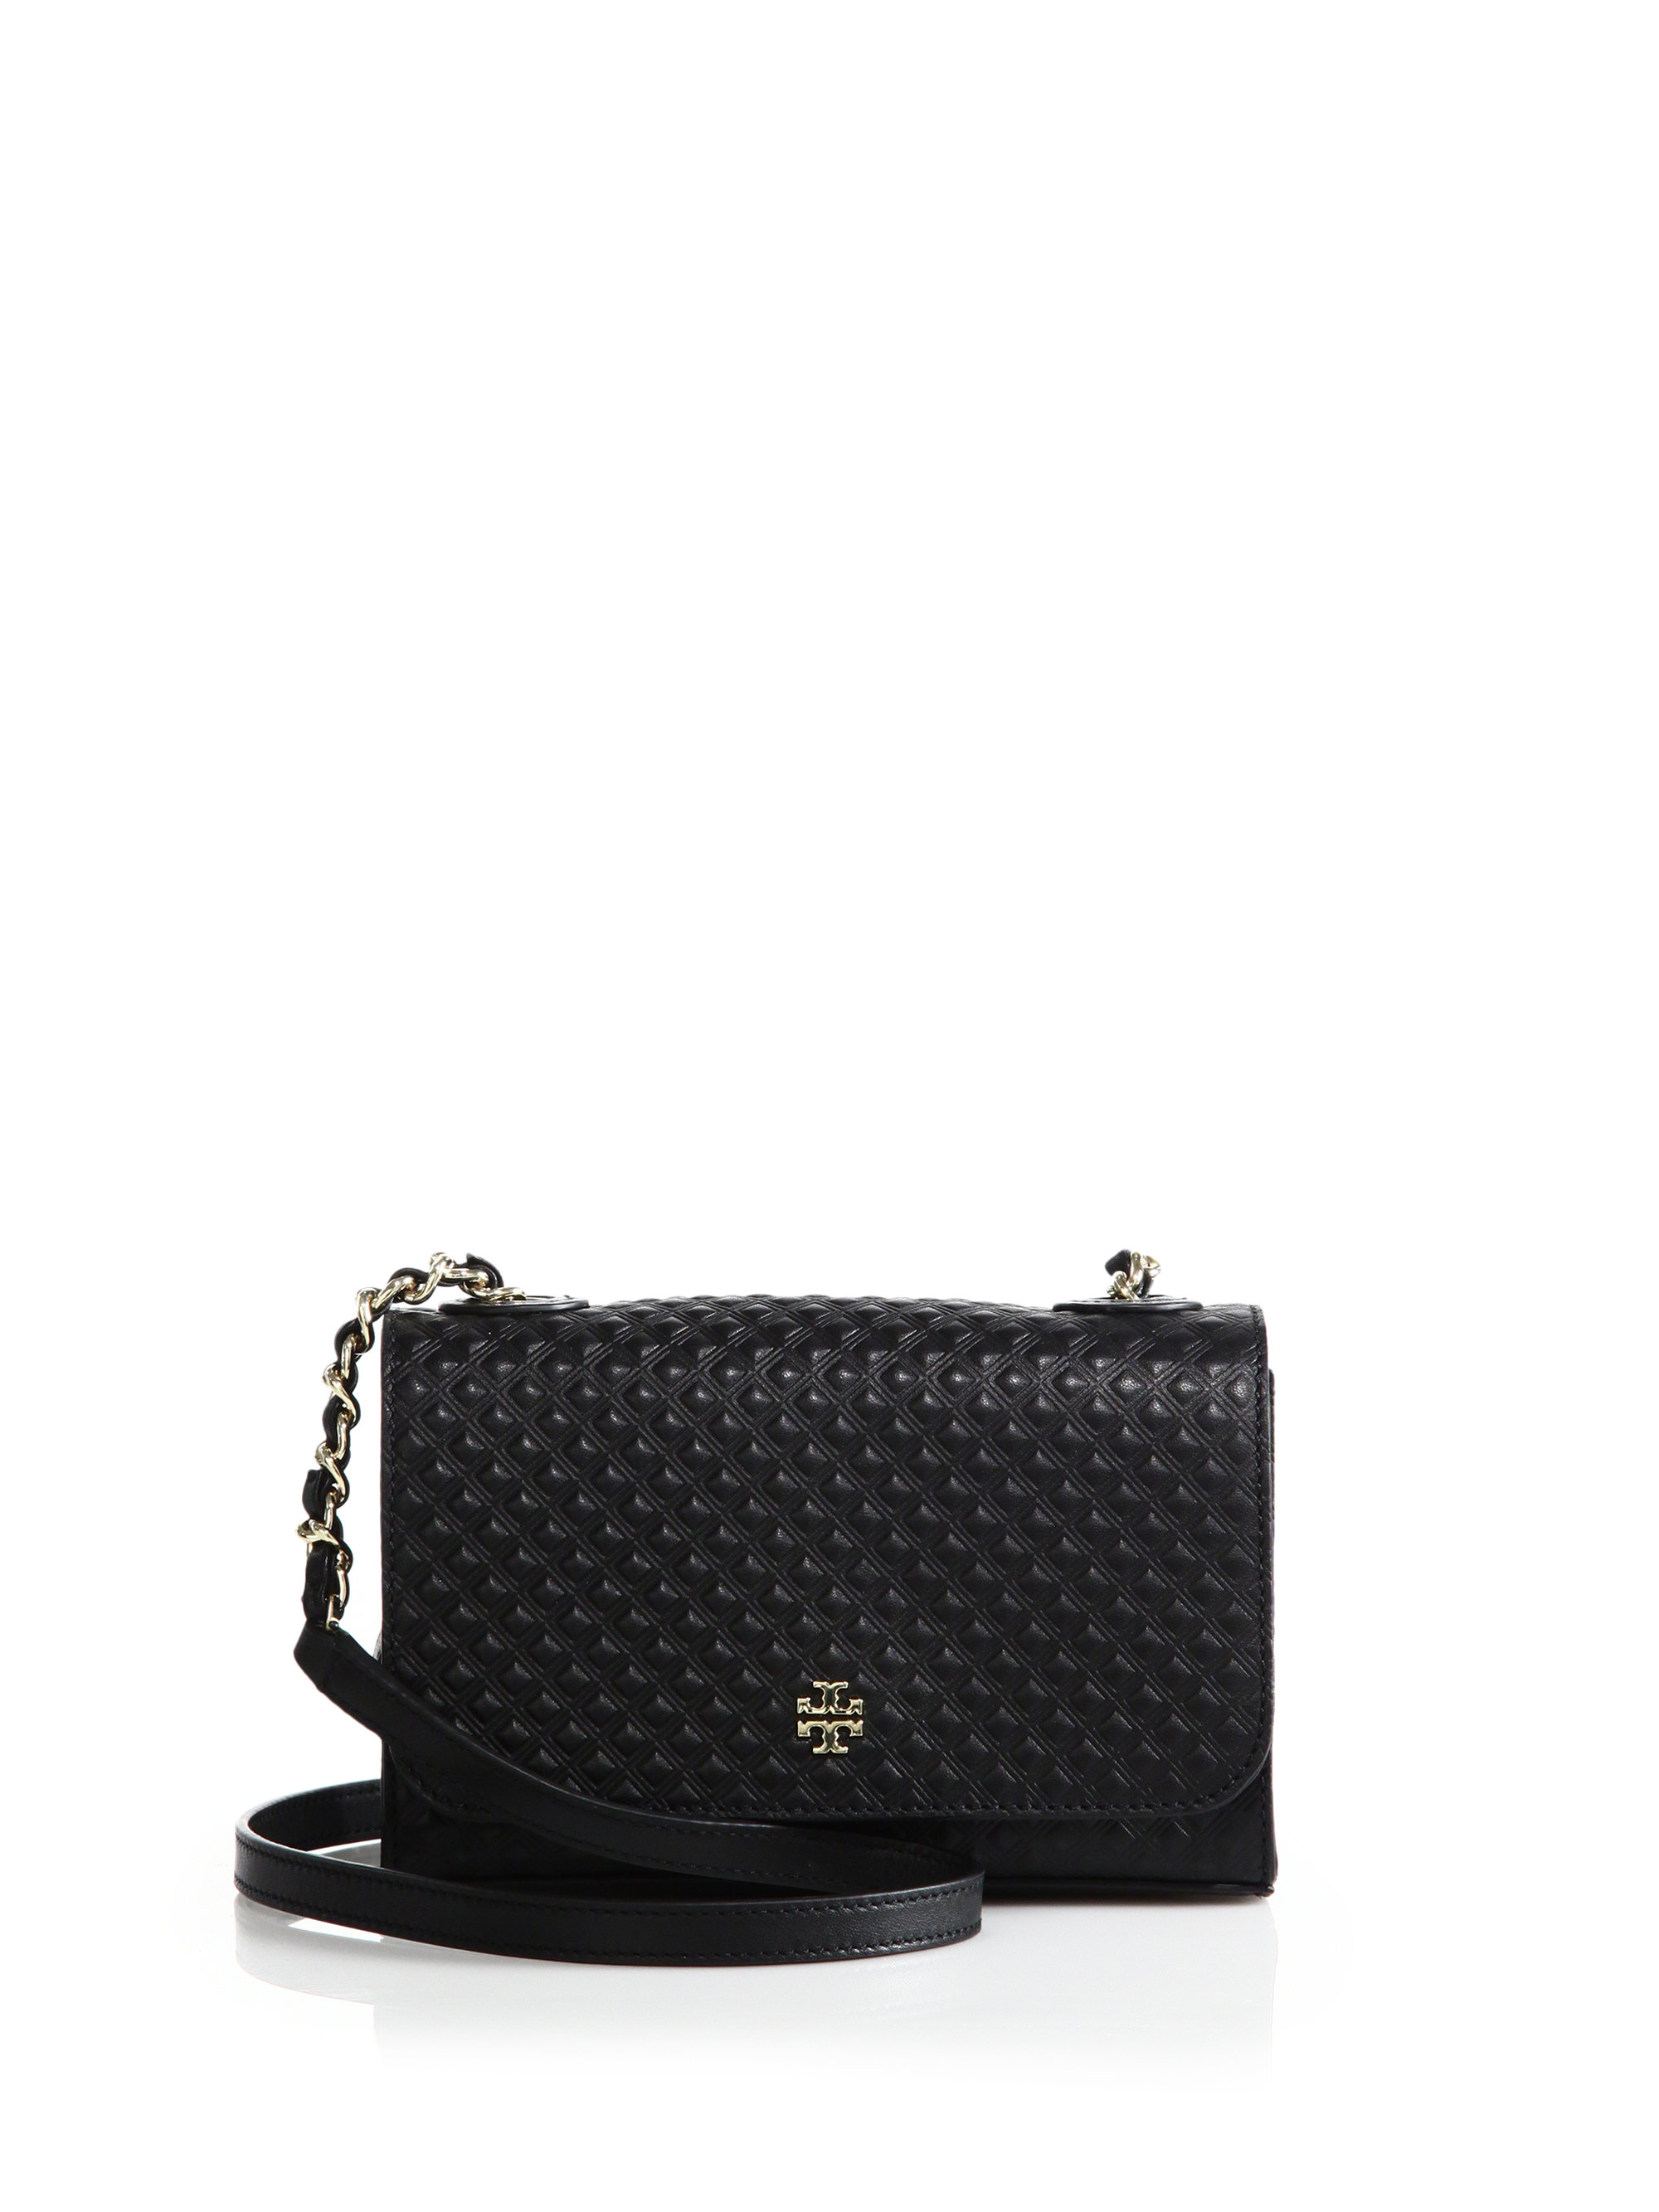 Tory burch Marion Quilted Leather Crossbody Bag in Black | Lyst